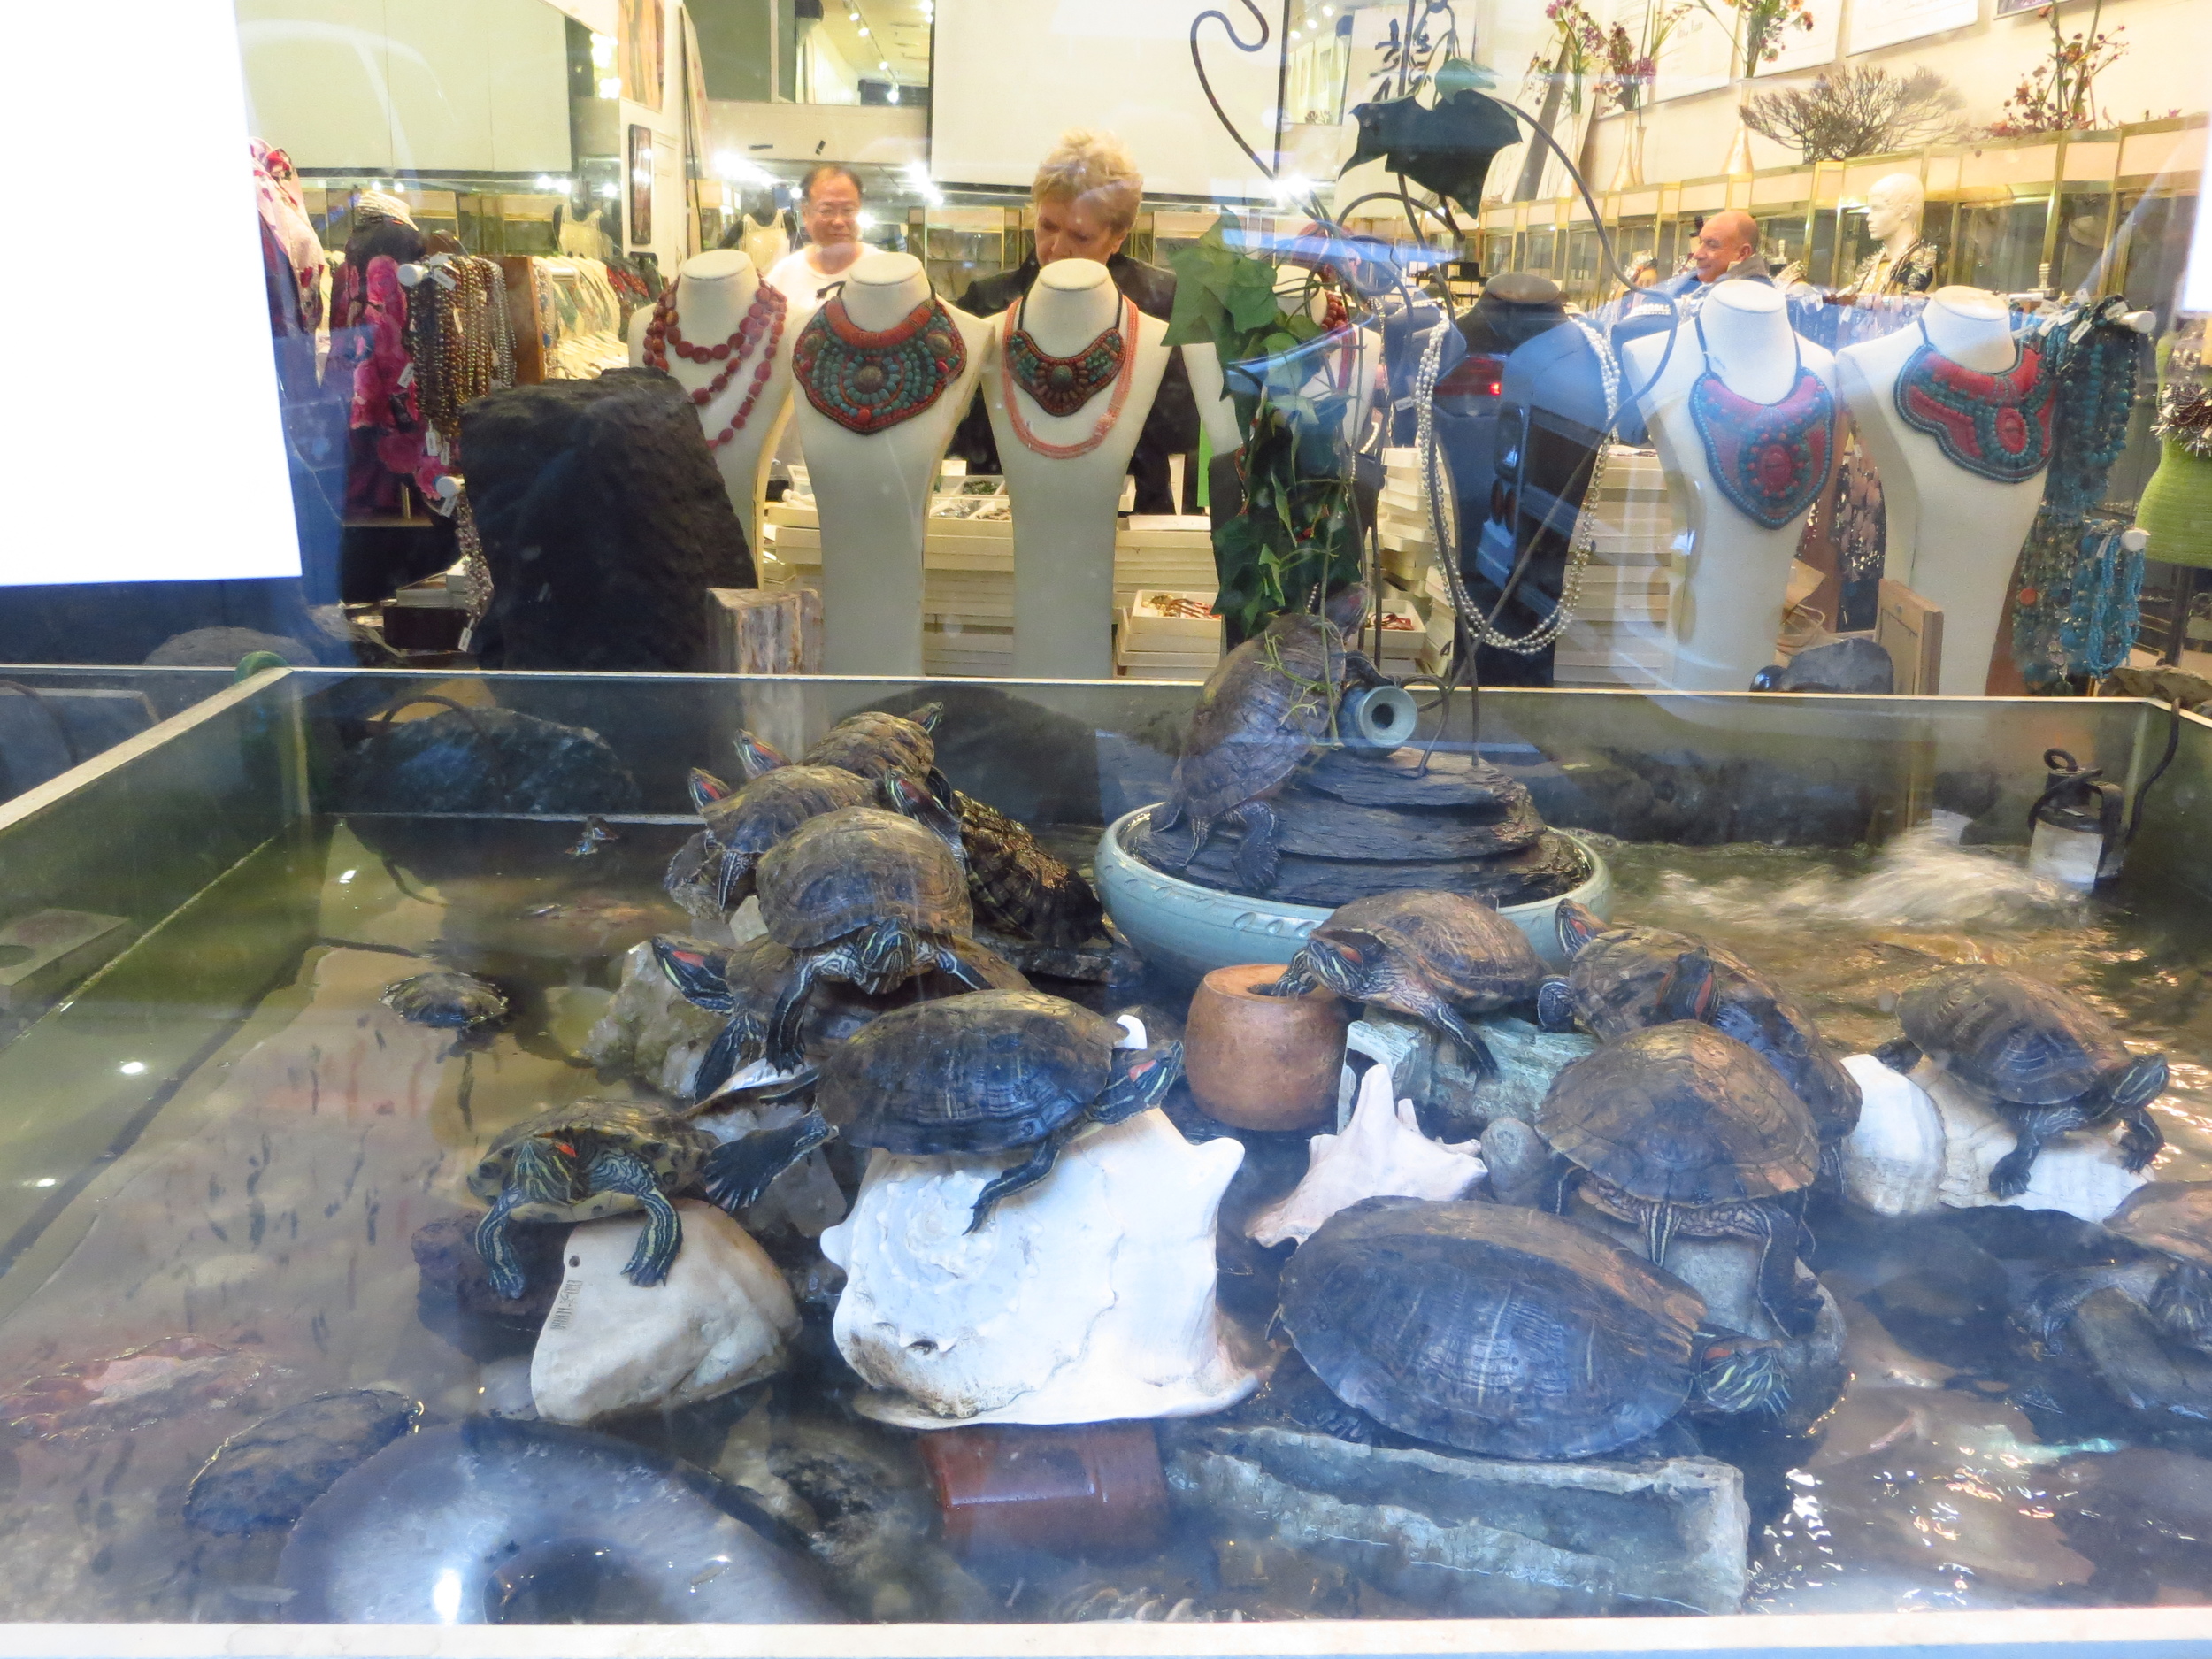 There's a cool story behind the turtles at this pearl store